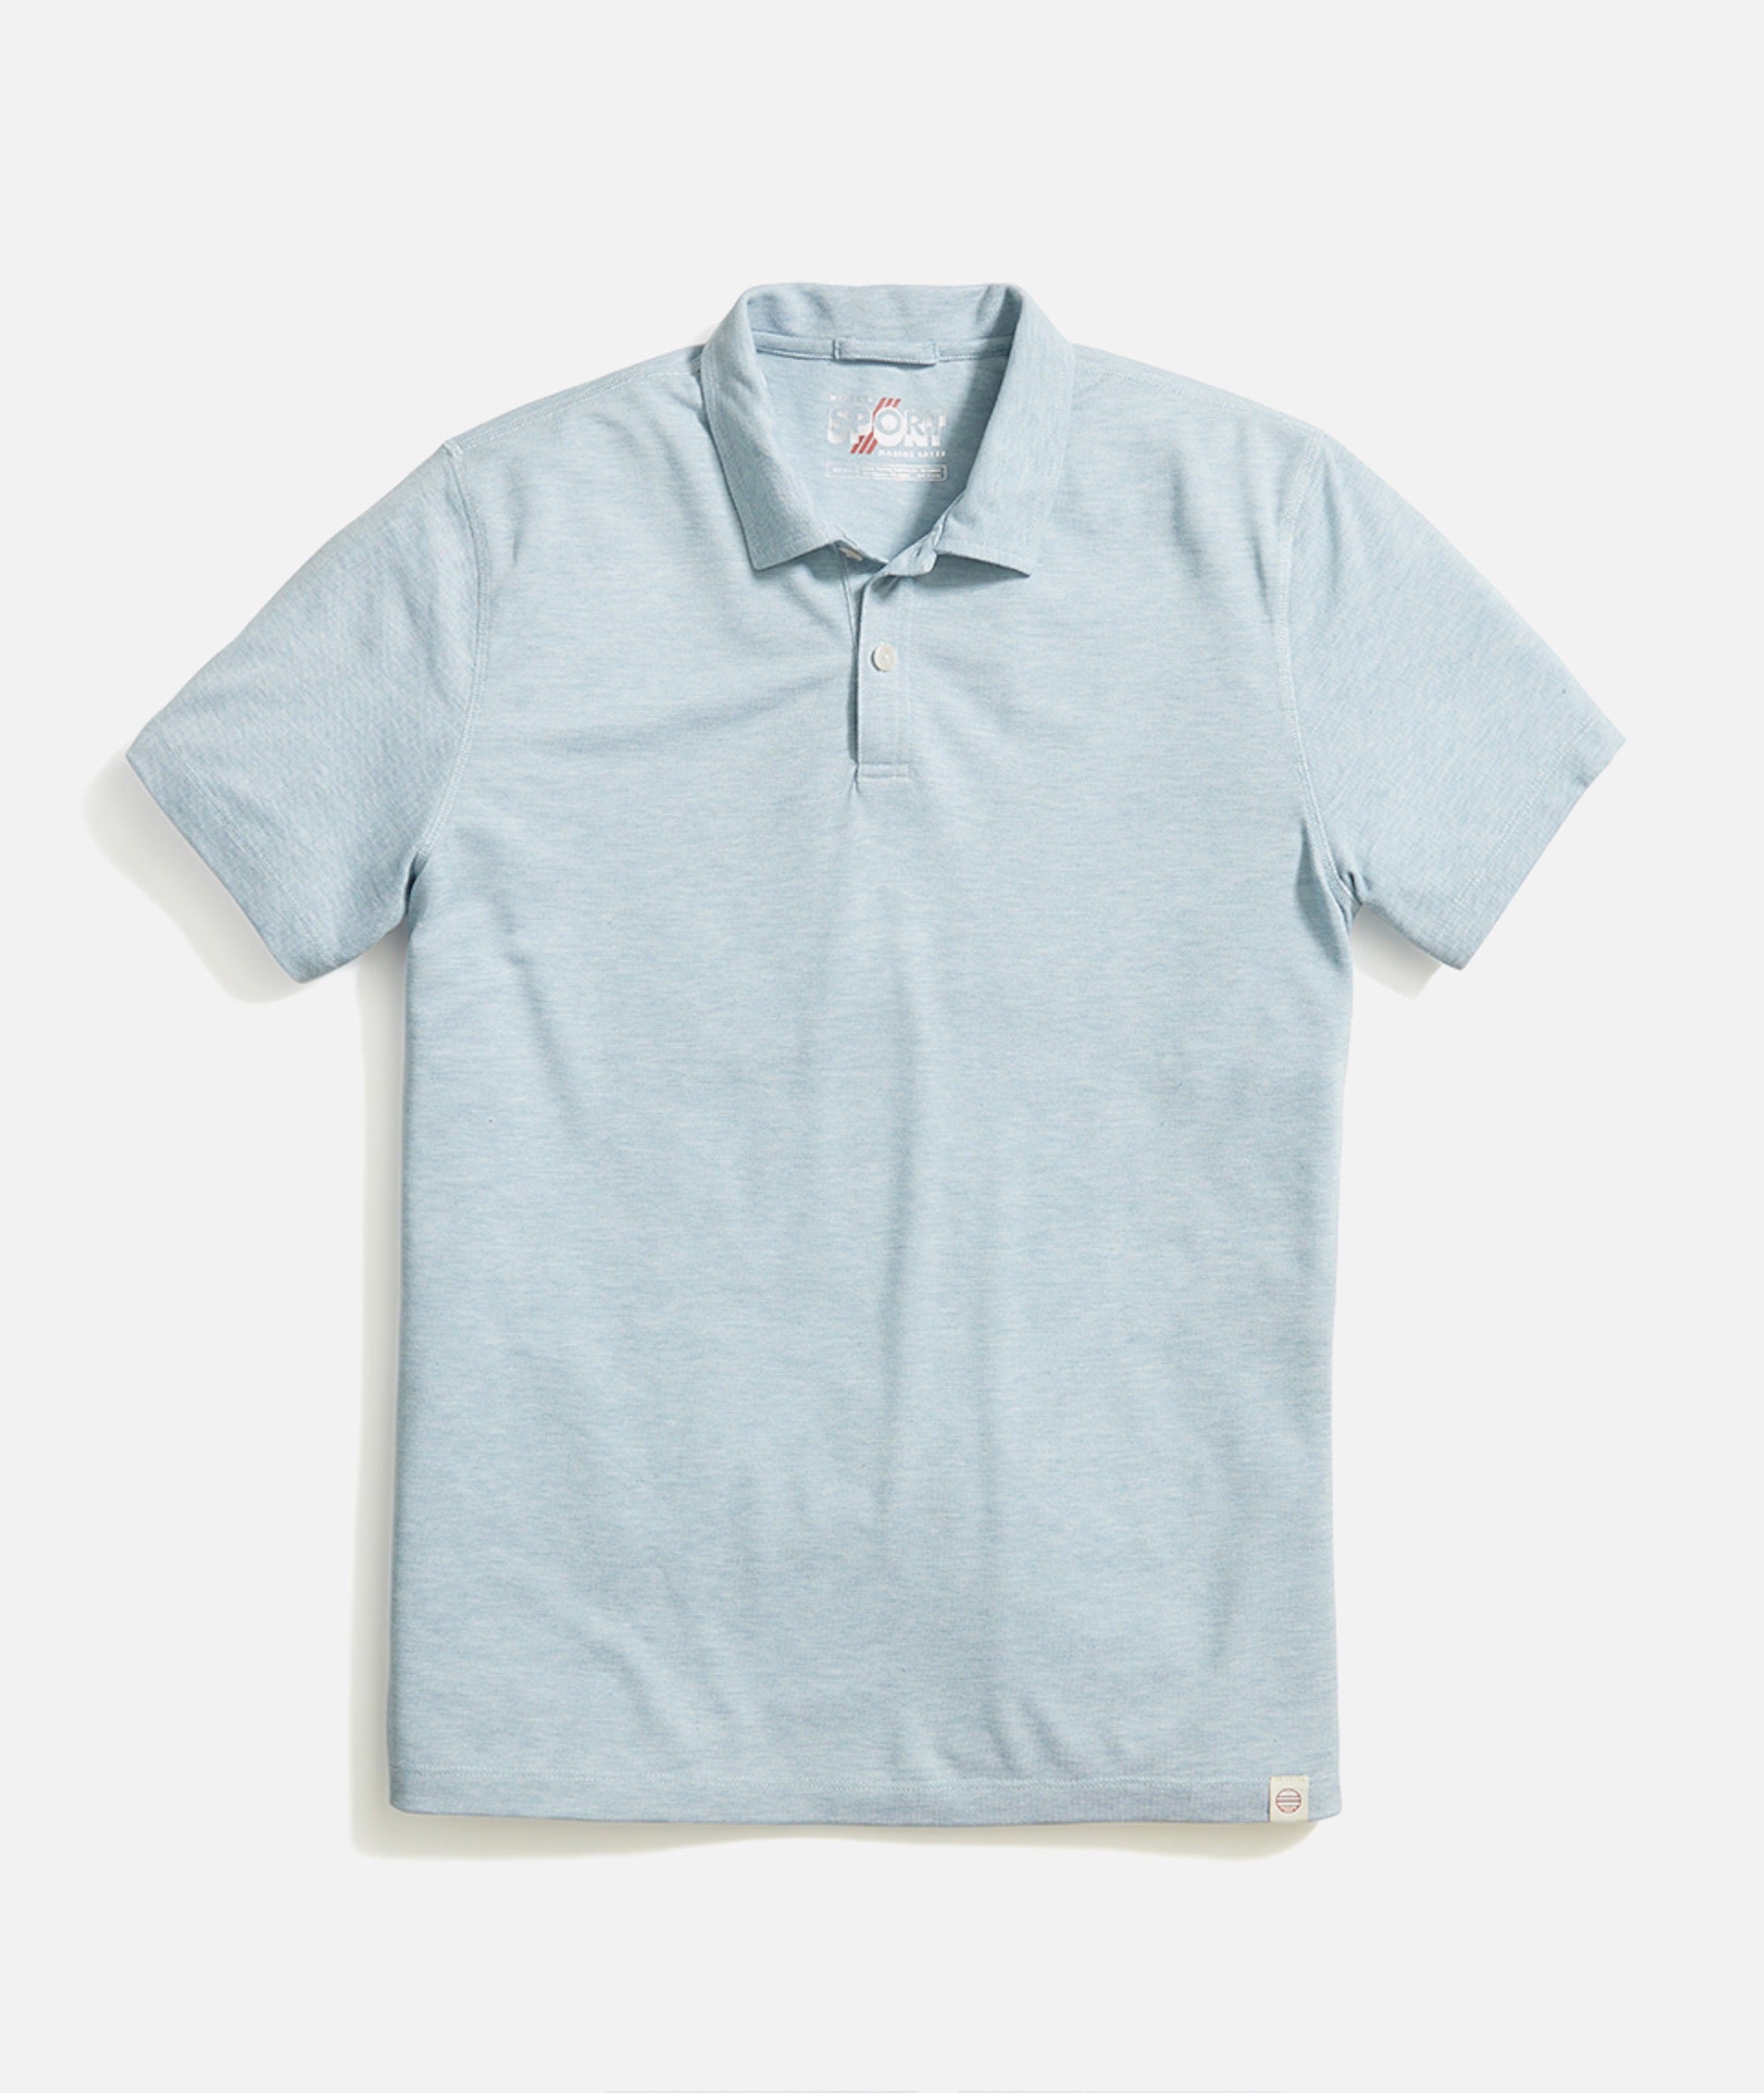 Cool Blue in – Cotton Pique Layer Marine Heather Polo China